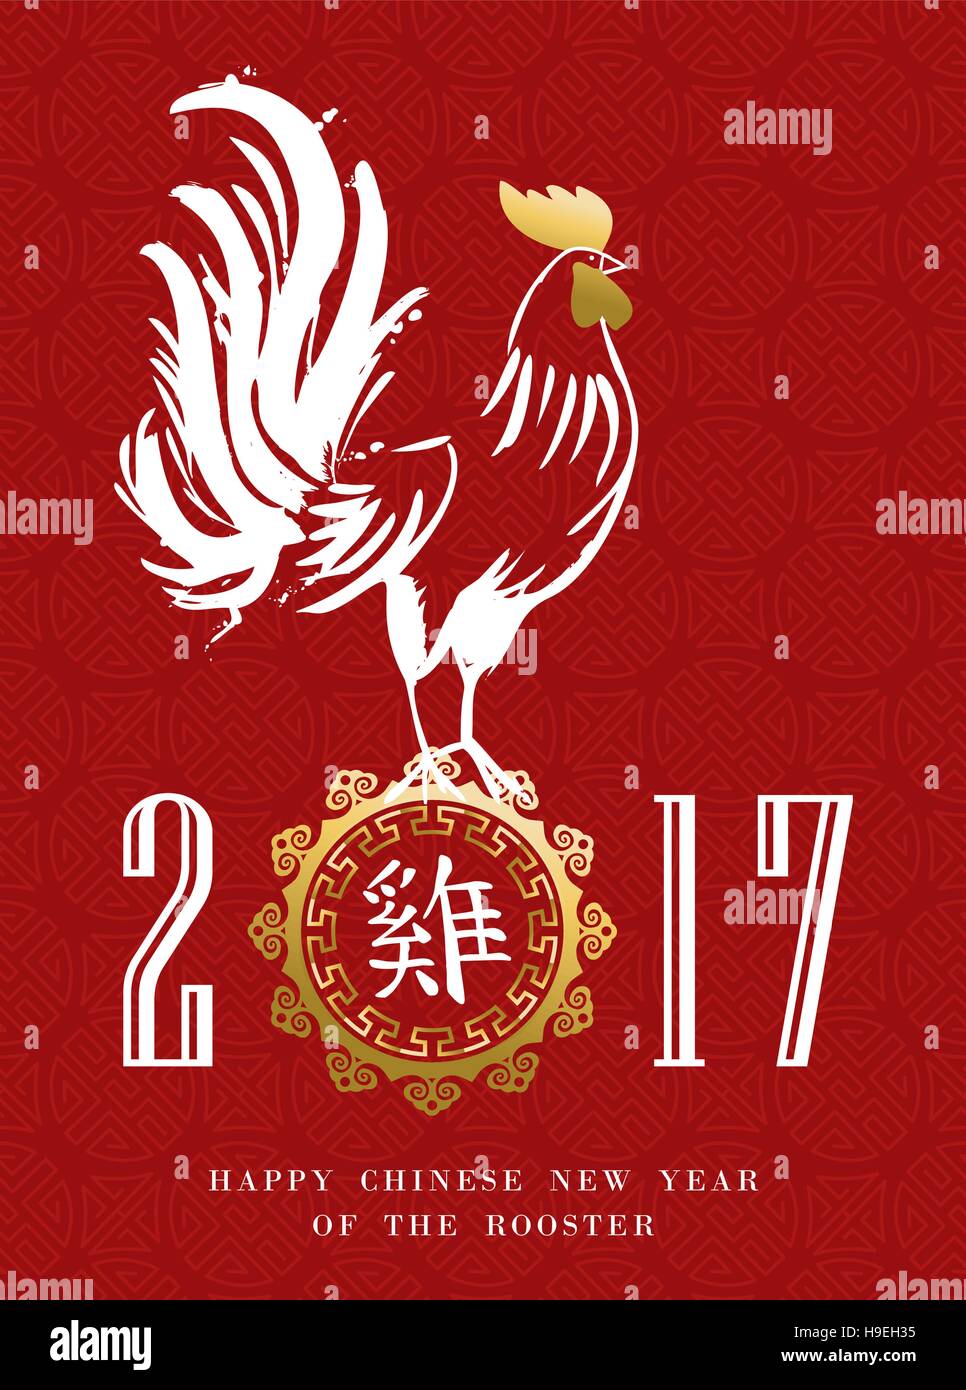 Happy Chinese New Year 2017, painted art in gold and red color with traditional calligraphy that means Rooster. EPS10 vector. Stock Vector